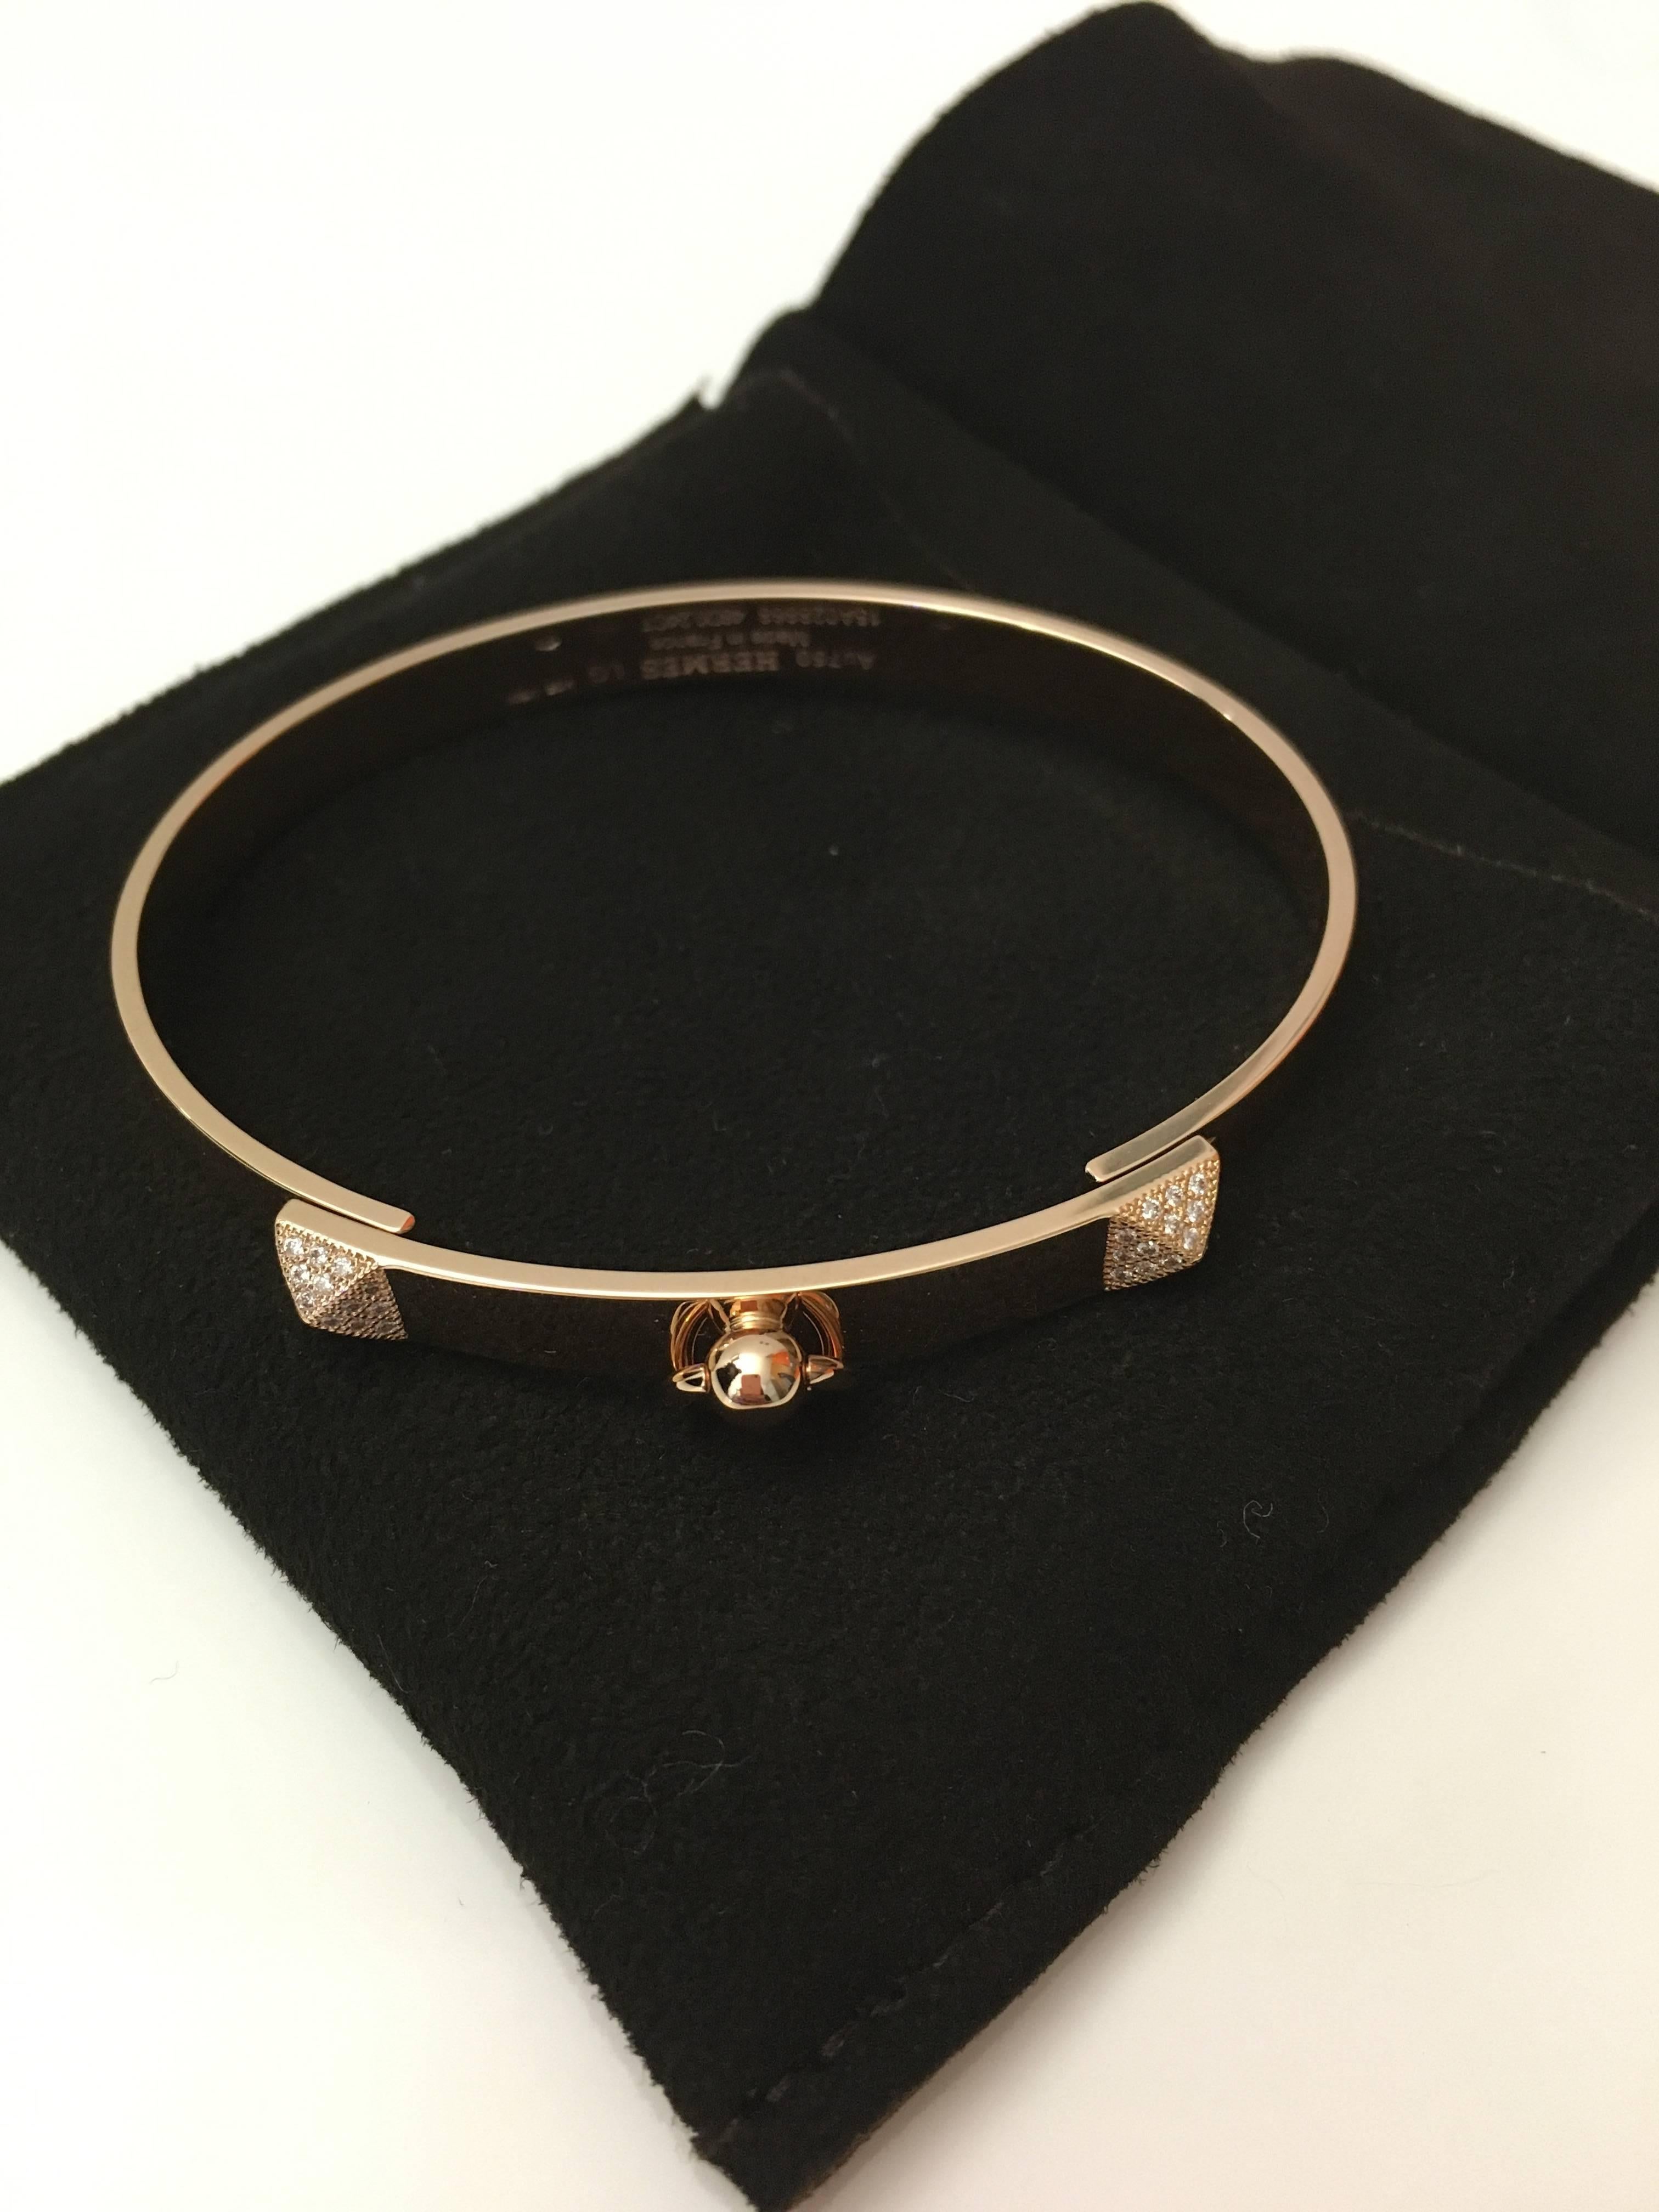 Hermes Collier de Chien Diamond Pink Gold Bracelet In New Condition For Sale In London, GB